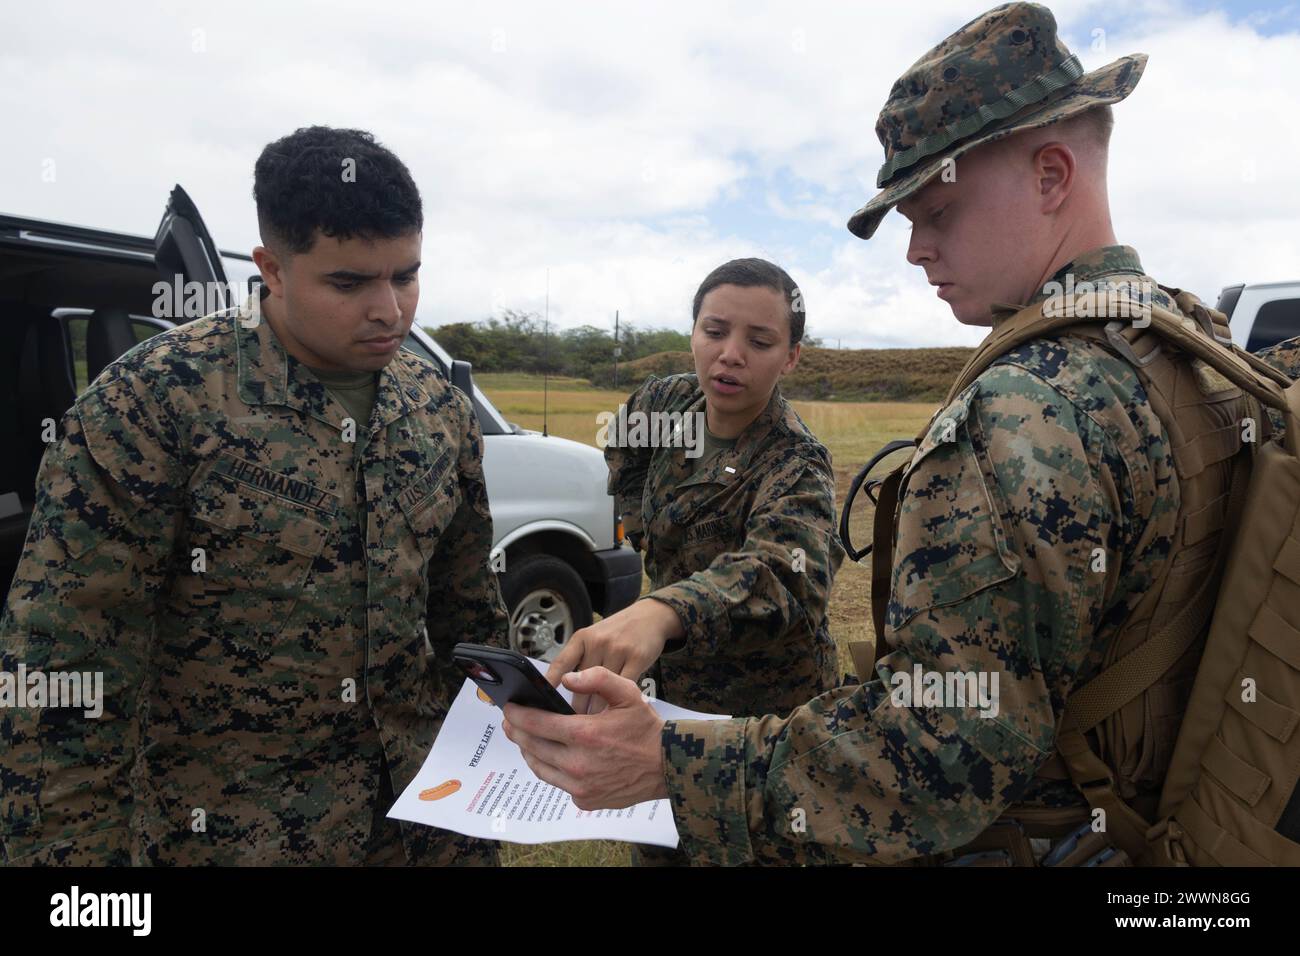 U.S. Marine Corps 1st Lt. Isis Coty, center, and Cpl. Hernandez, left, with Marine Aircraft Group (MAG) 24, 1st Marine Aircraft Wing, show a menu to a Marine on the rifle range during a volunteer event at Puuloa Range Training Facility, Ewa beach, Feb. 22, 2024. Marines with MAG-24 prepared and sold burgers, hotdogs, chips and drinks to Marines on the rifle range to raise funds for the 249th Marine Corps Ball.  Marine Corps Stock Photo